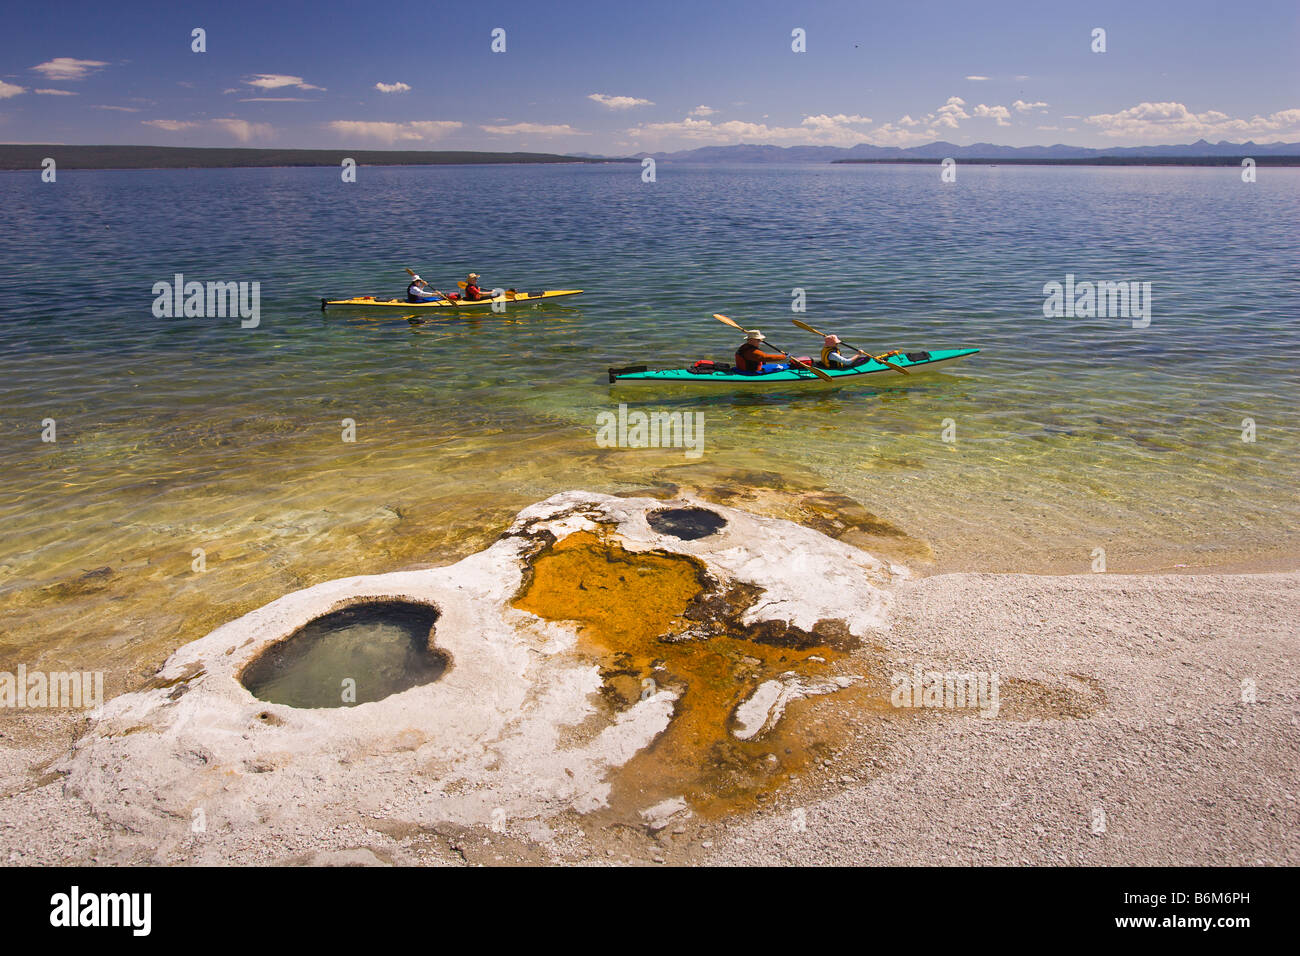 YELLOWSTONE NATIONAL PARK WYOMING USA - Tourists in kayaks on Lake Yellowstone at the West Thumb Geyser Basin Stock Photo